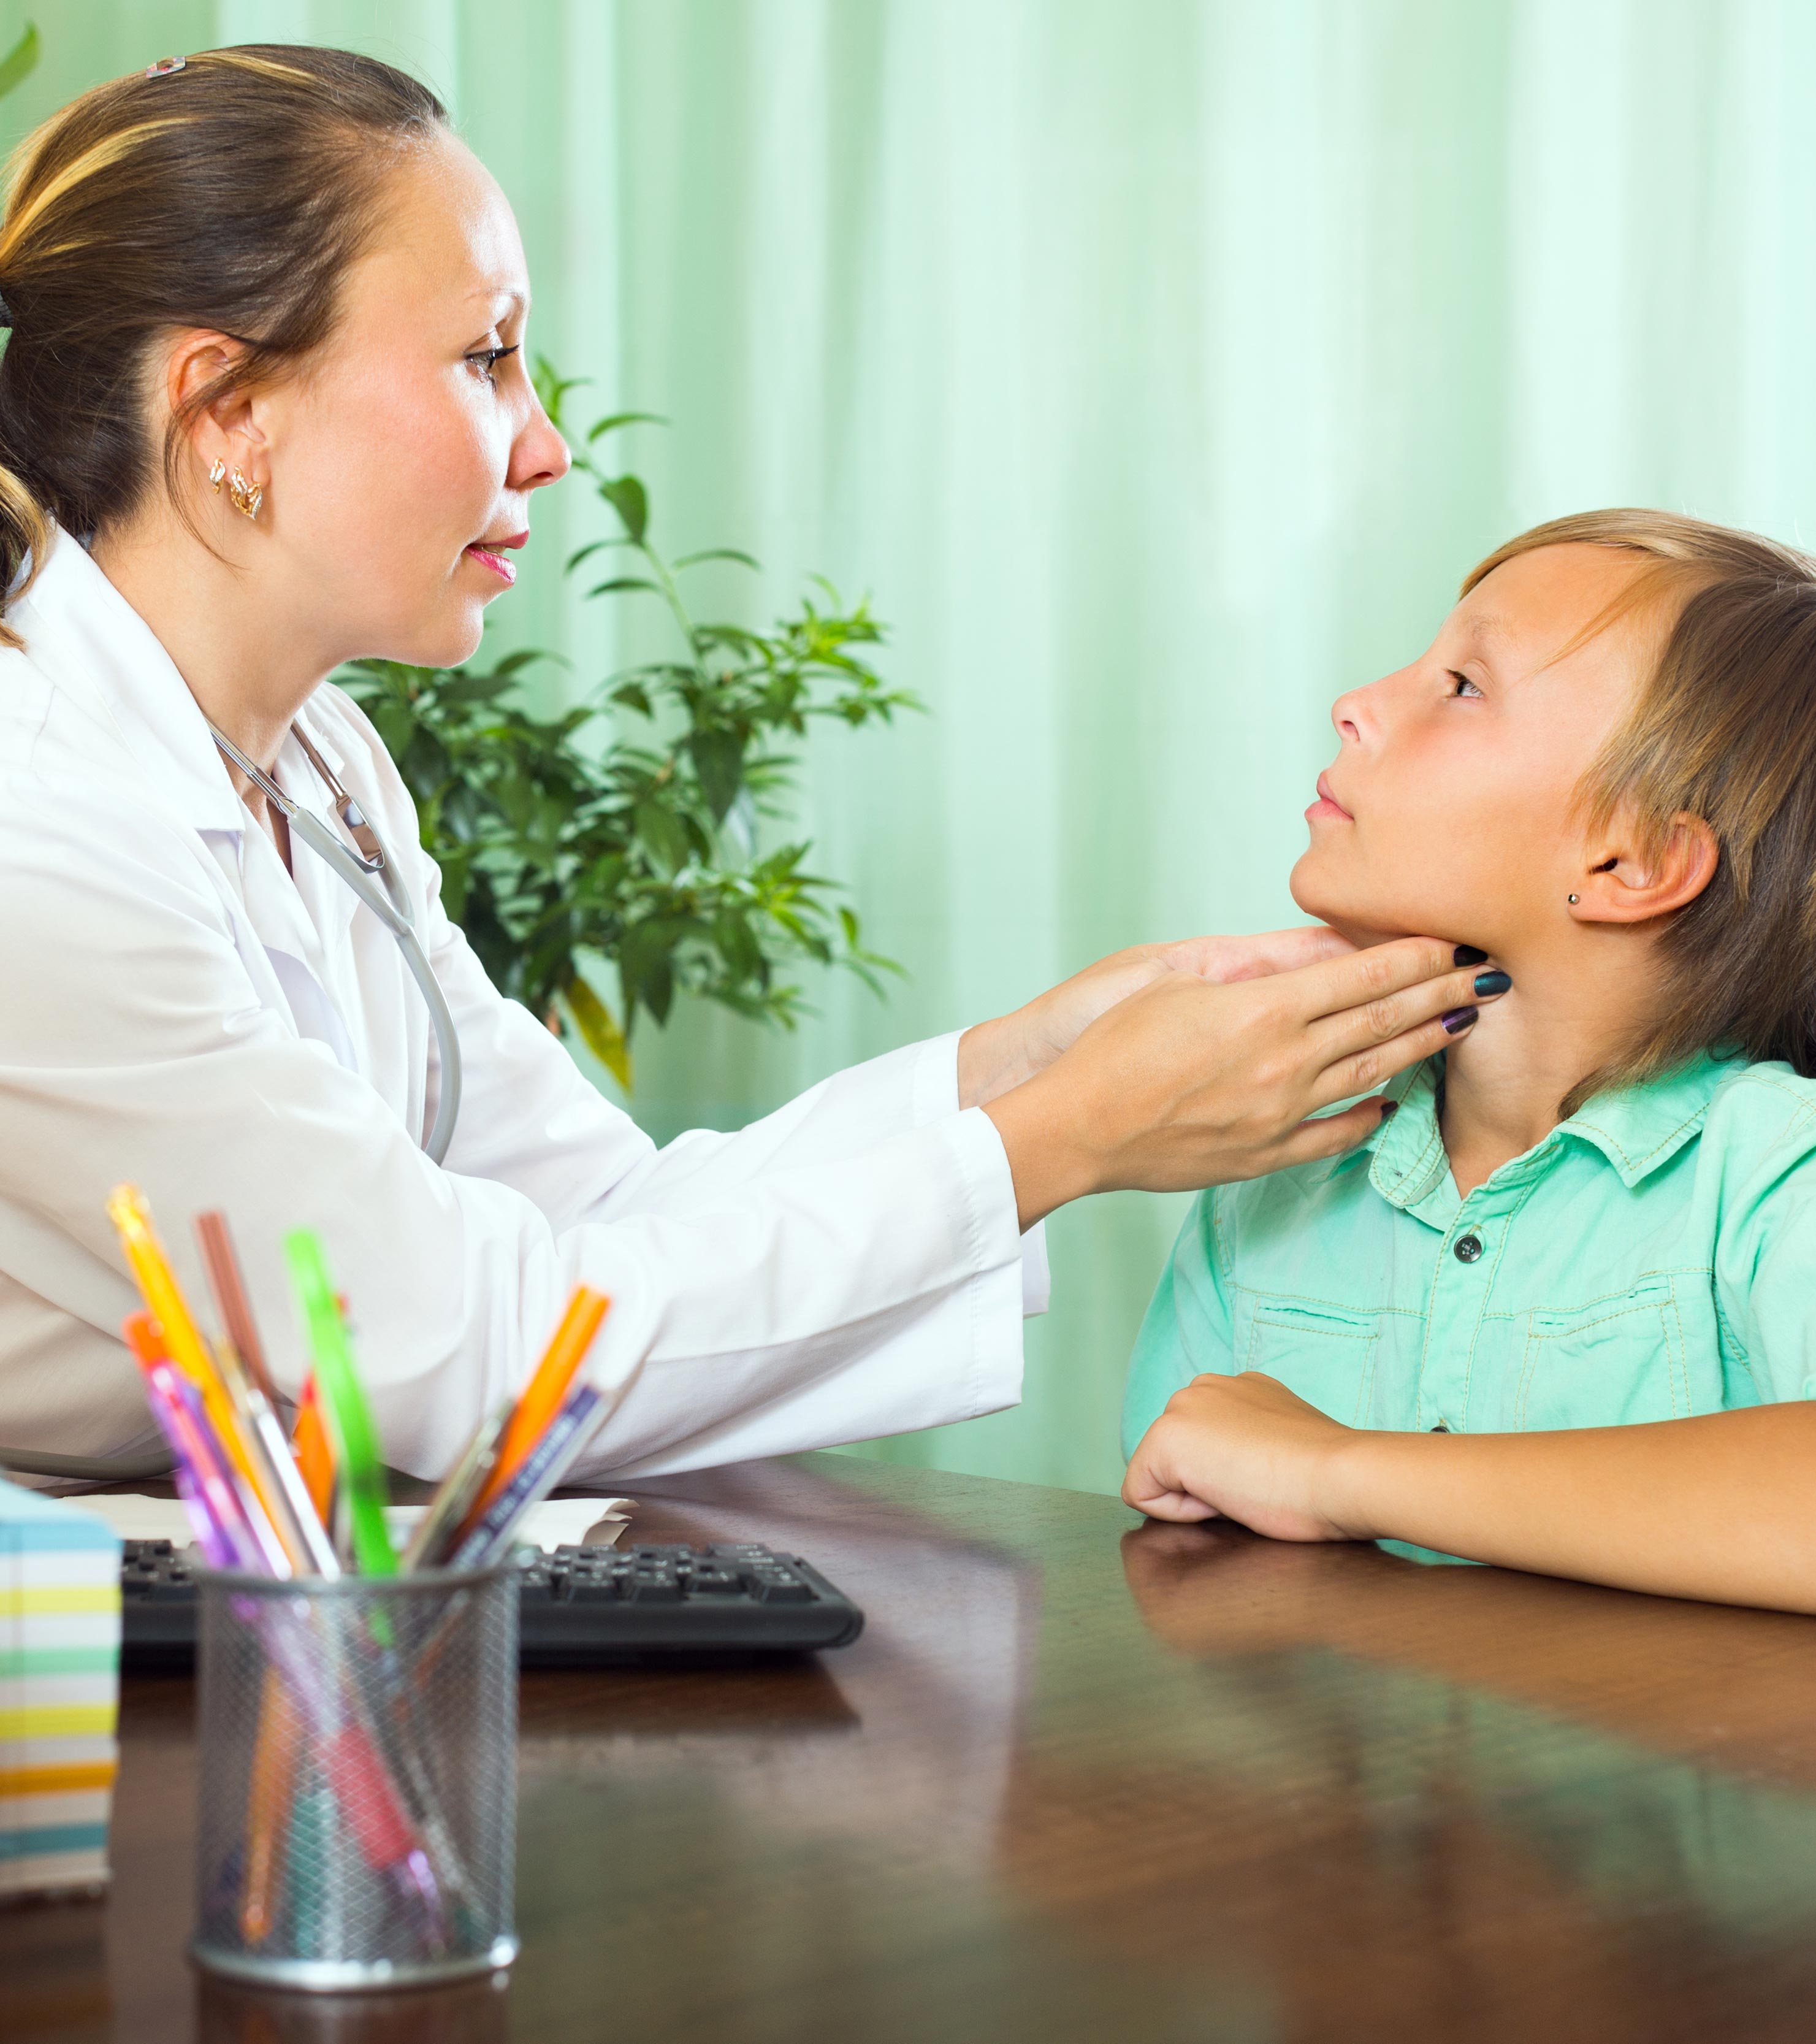 Hypothyroidism In Children: Causes, Symptoms And Treatment